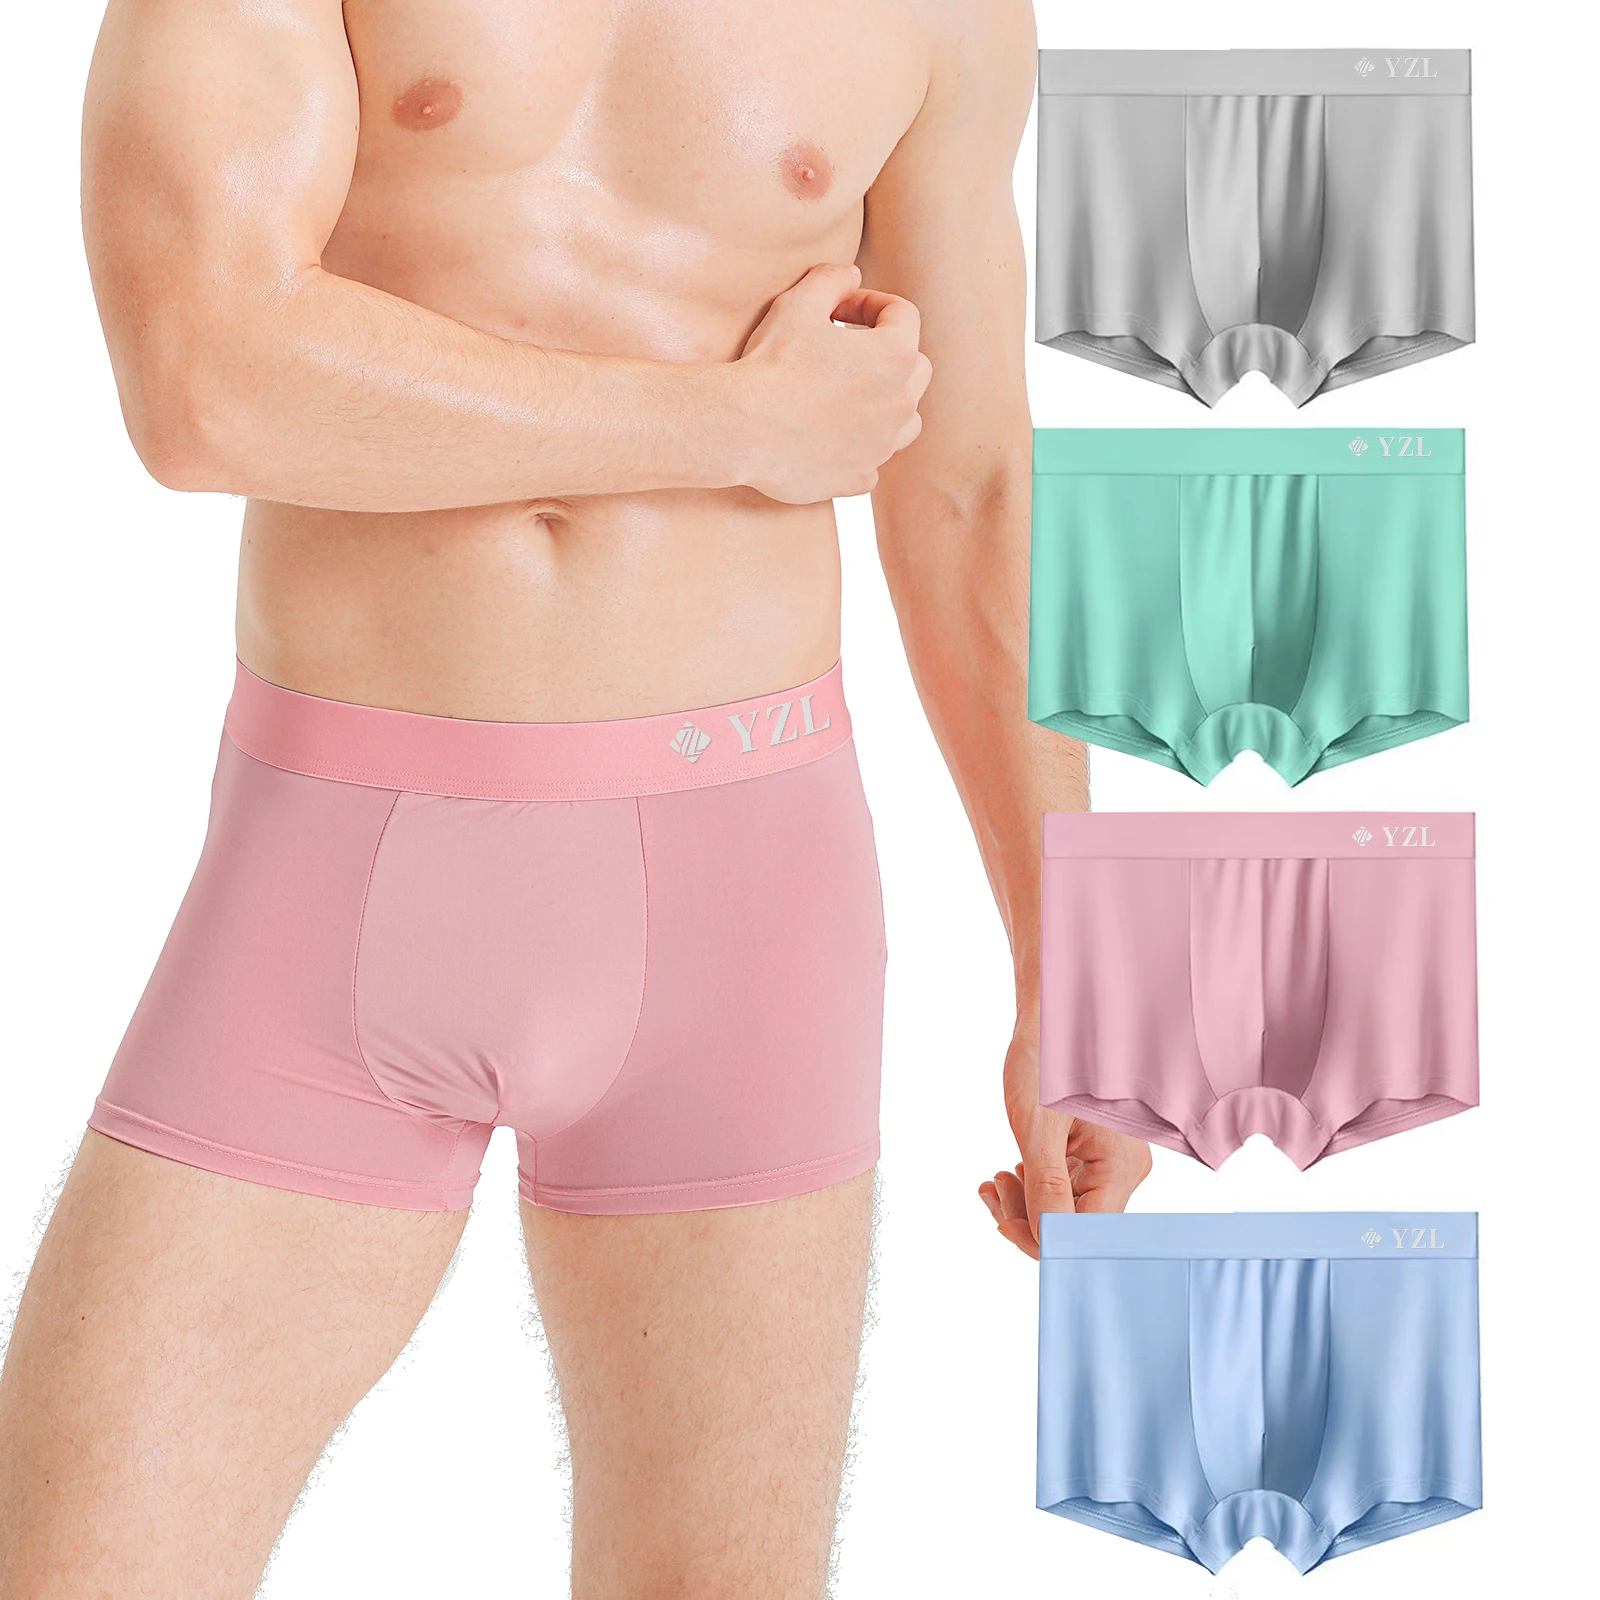 Men's Underwear ice Silk Flat Corner Shorts pants Summer Thin Antibacterial Modal Large Boys' Seamless Top Quality with Gift Box camellia antibacterial plastic pot with silver ion for washbasin the ultimate solution for hygiene and style